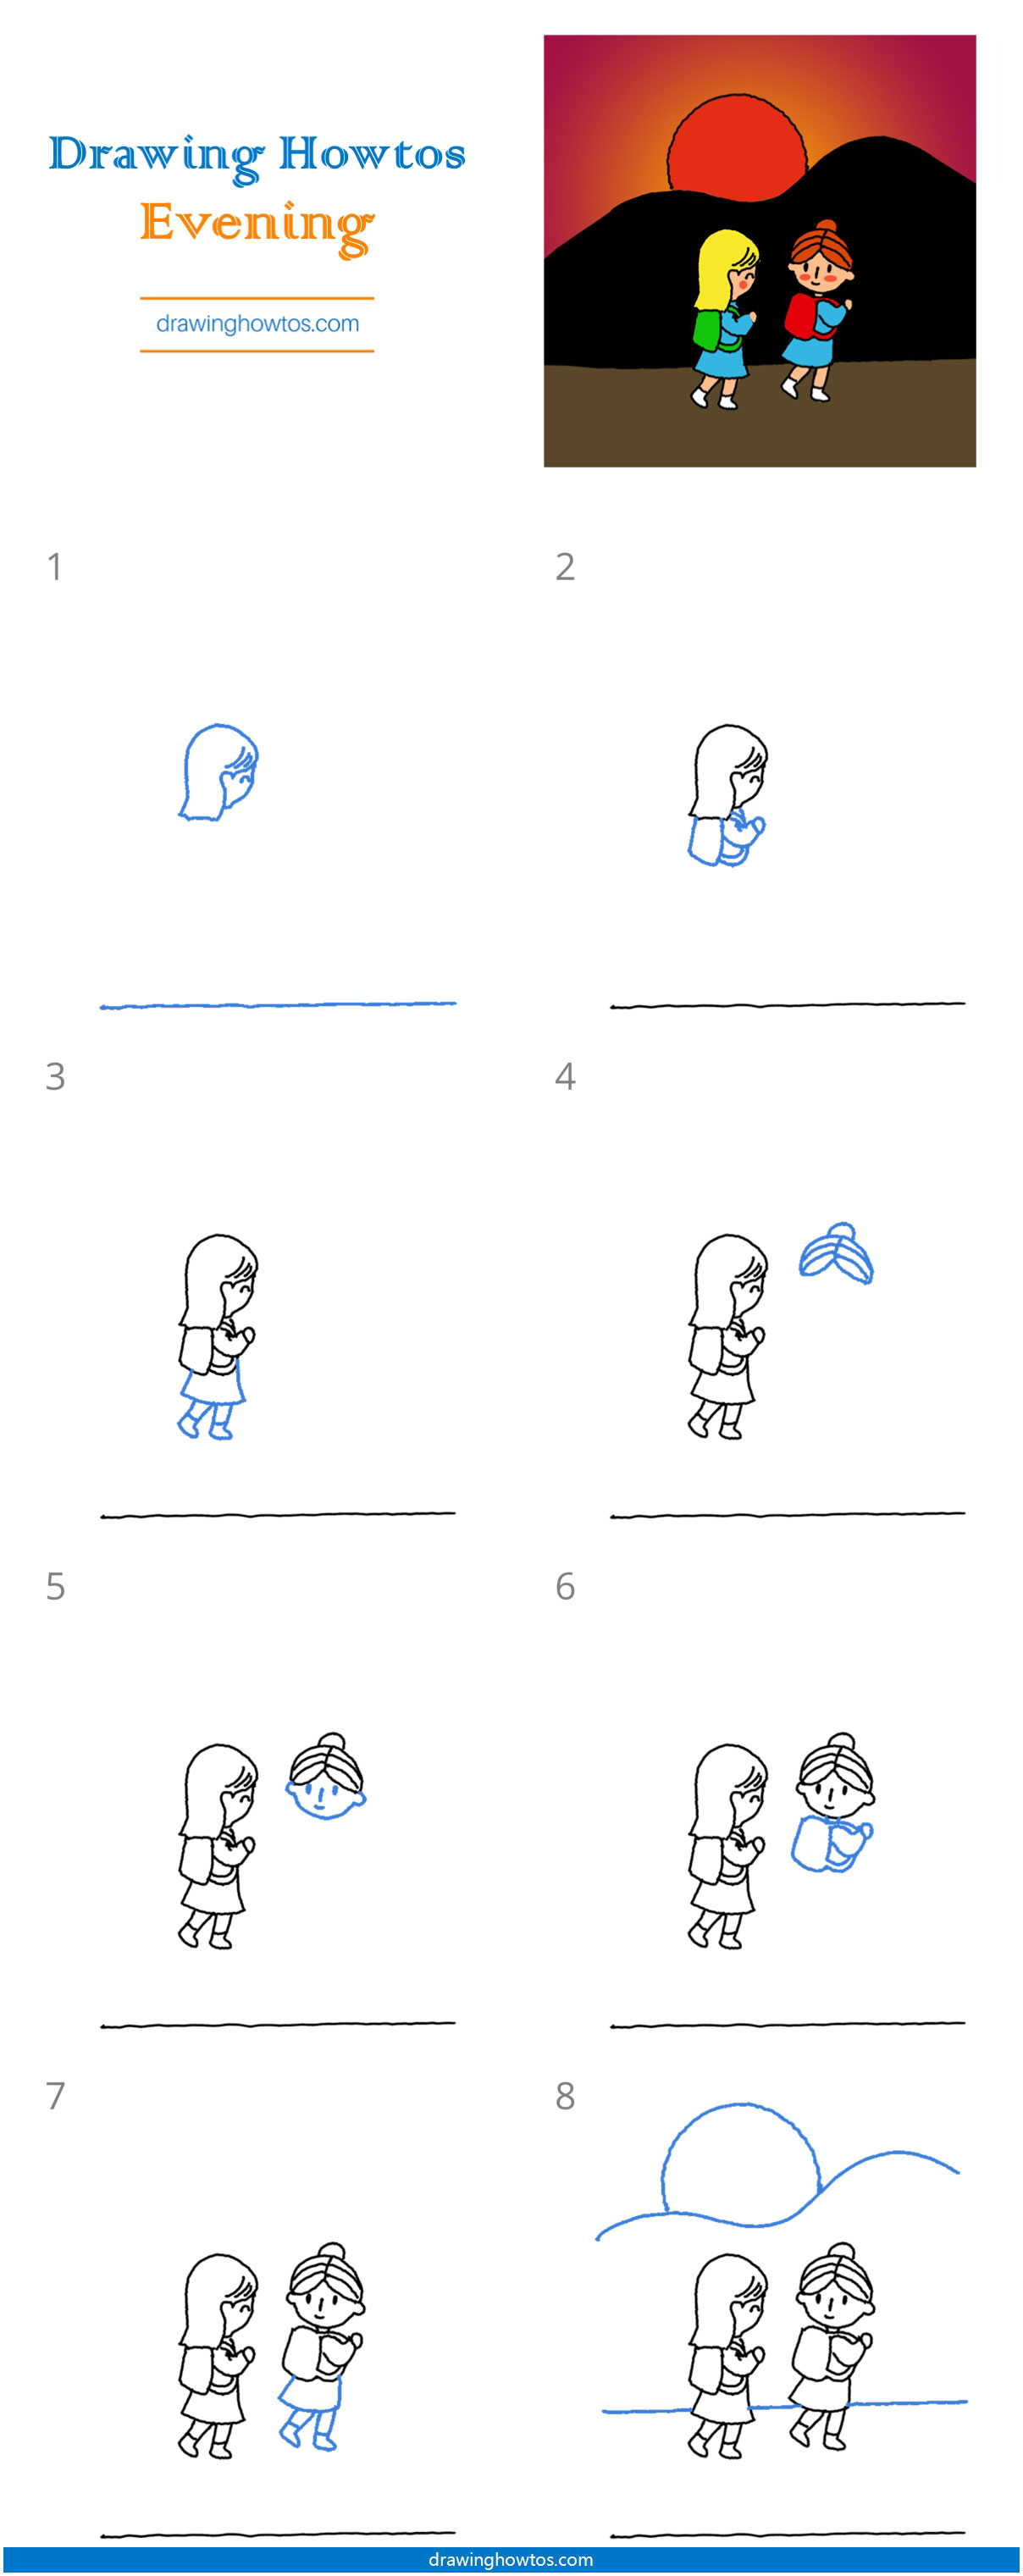 How to Draw Two Girls Leaving School at Evening Step by Step